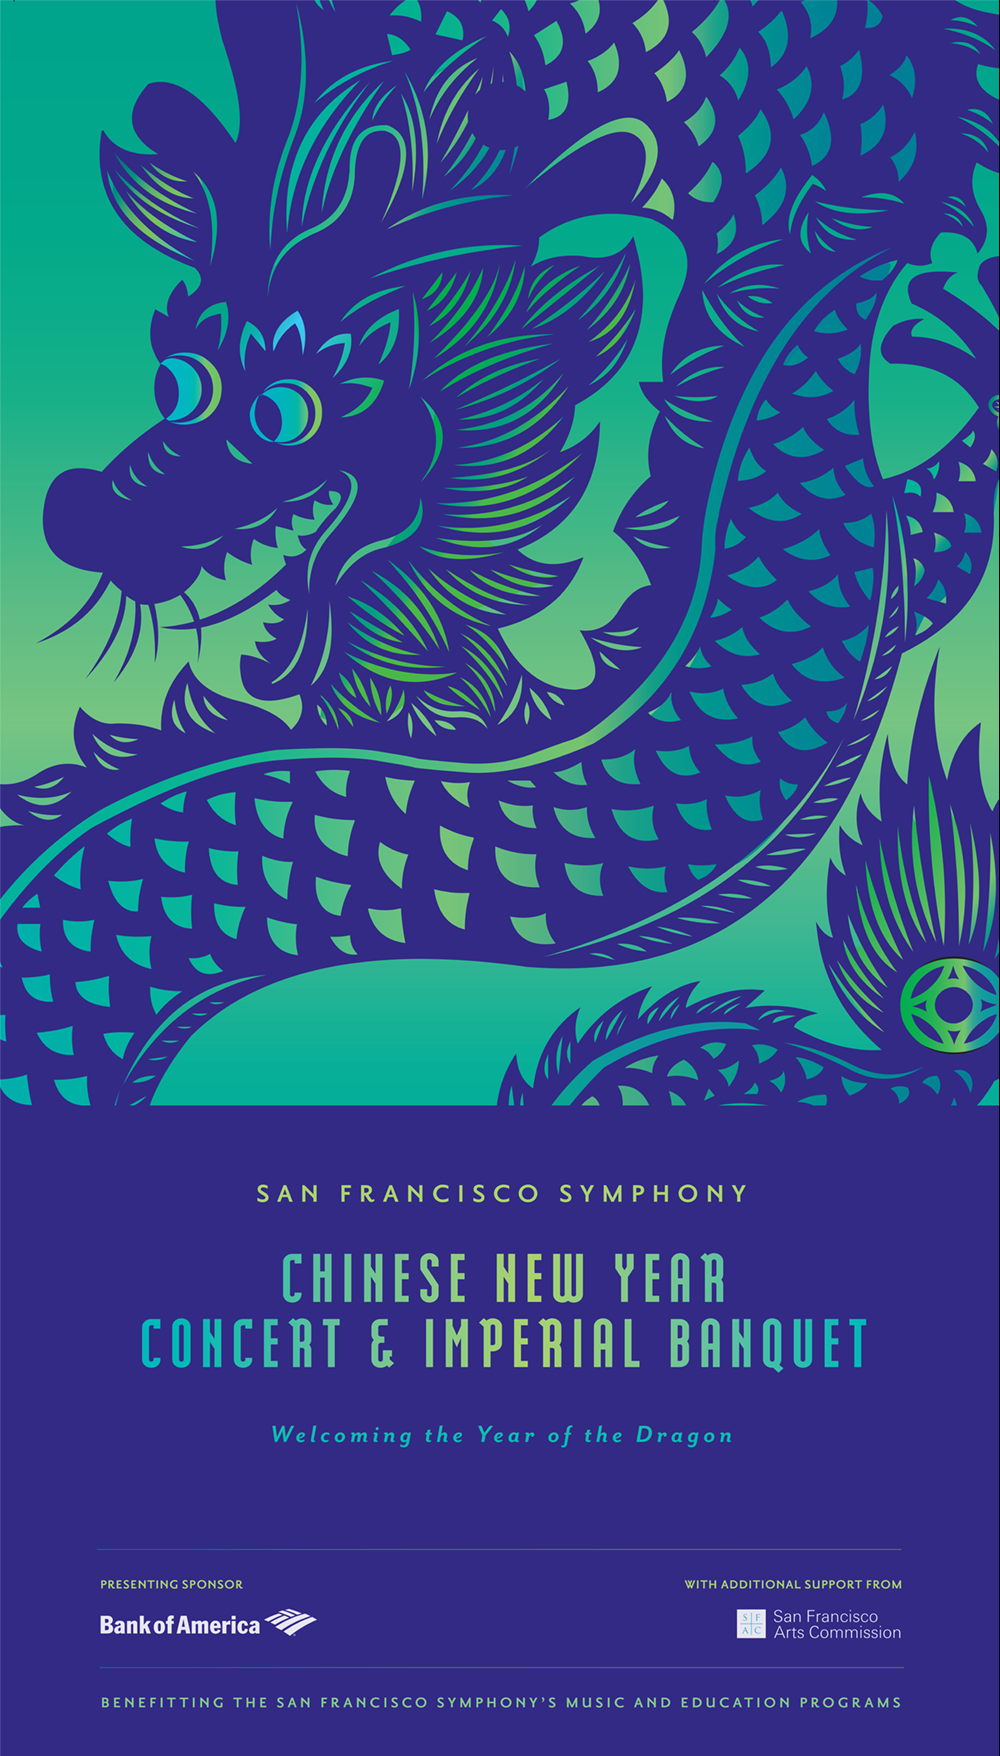 San Francisco Symphony 2012 Chinese New Year Concert